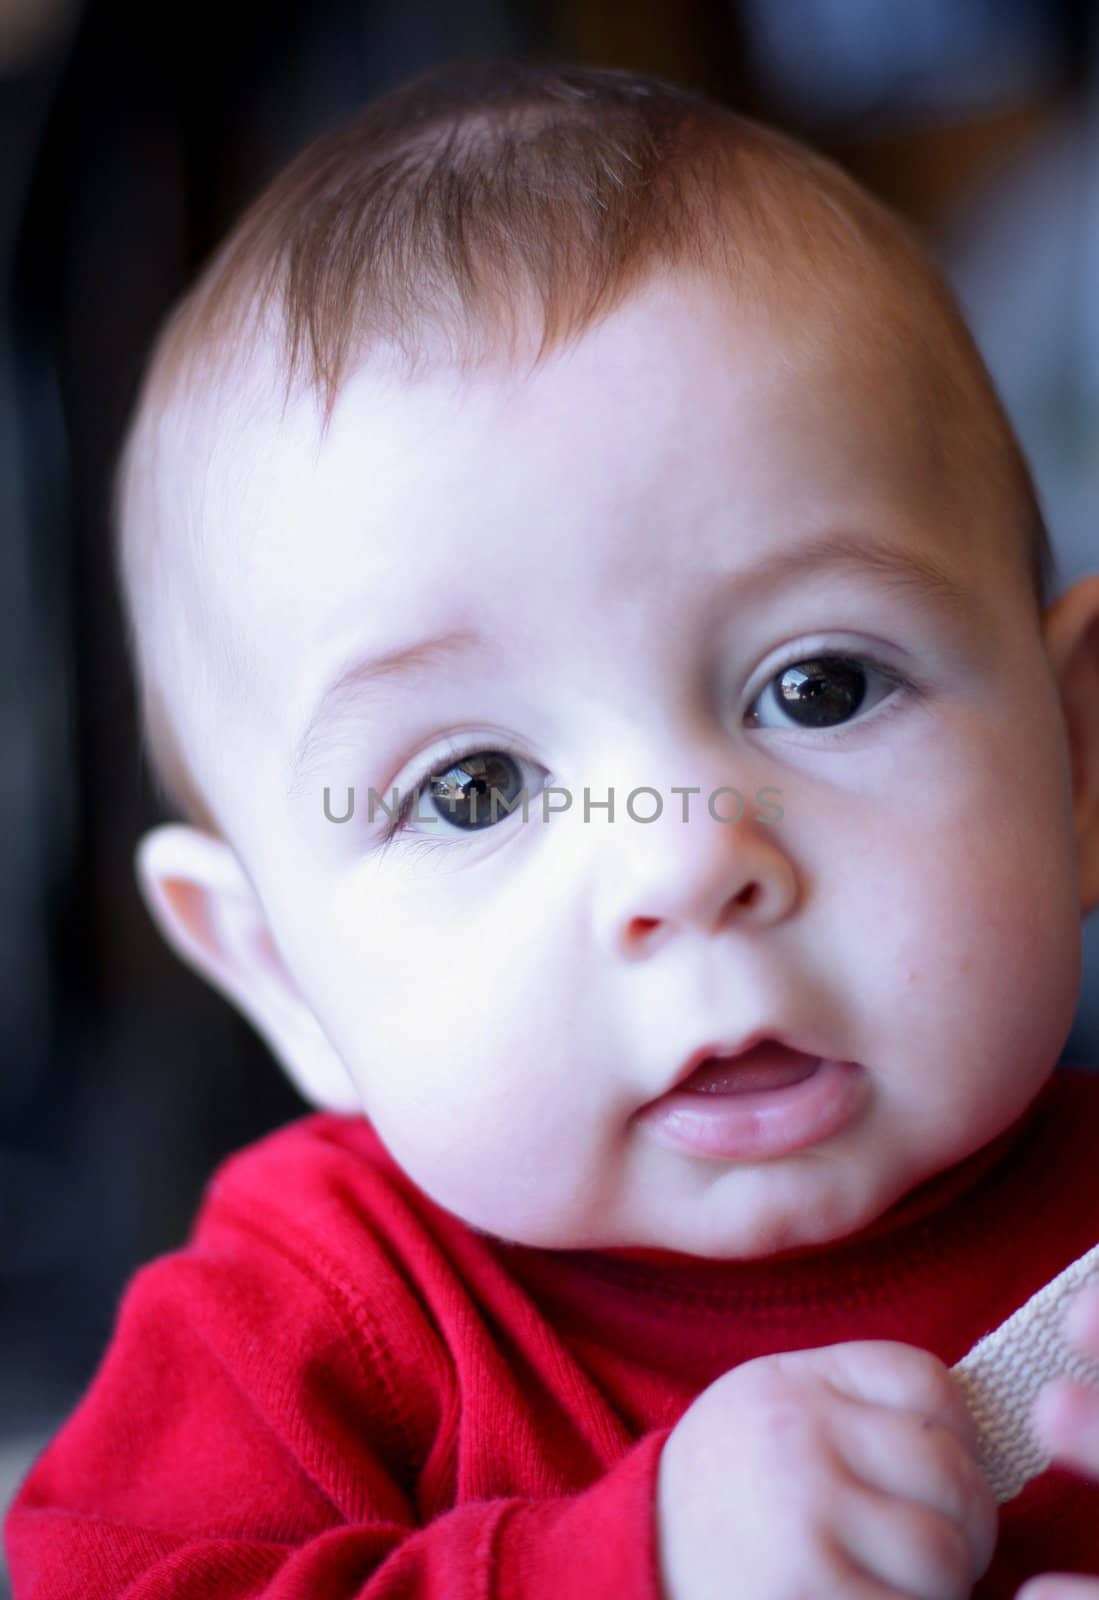 Adorable six month old baby boy looking intently at camera.